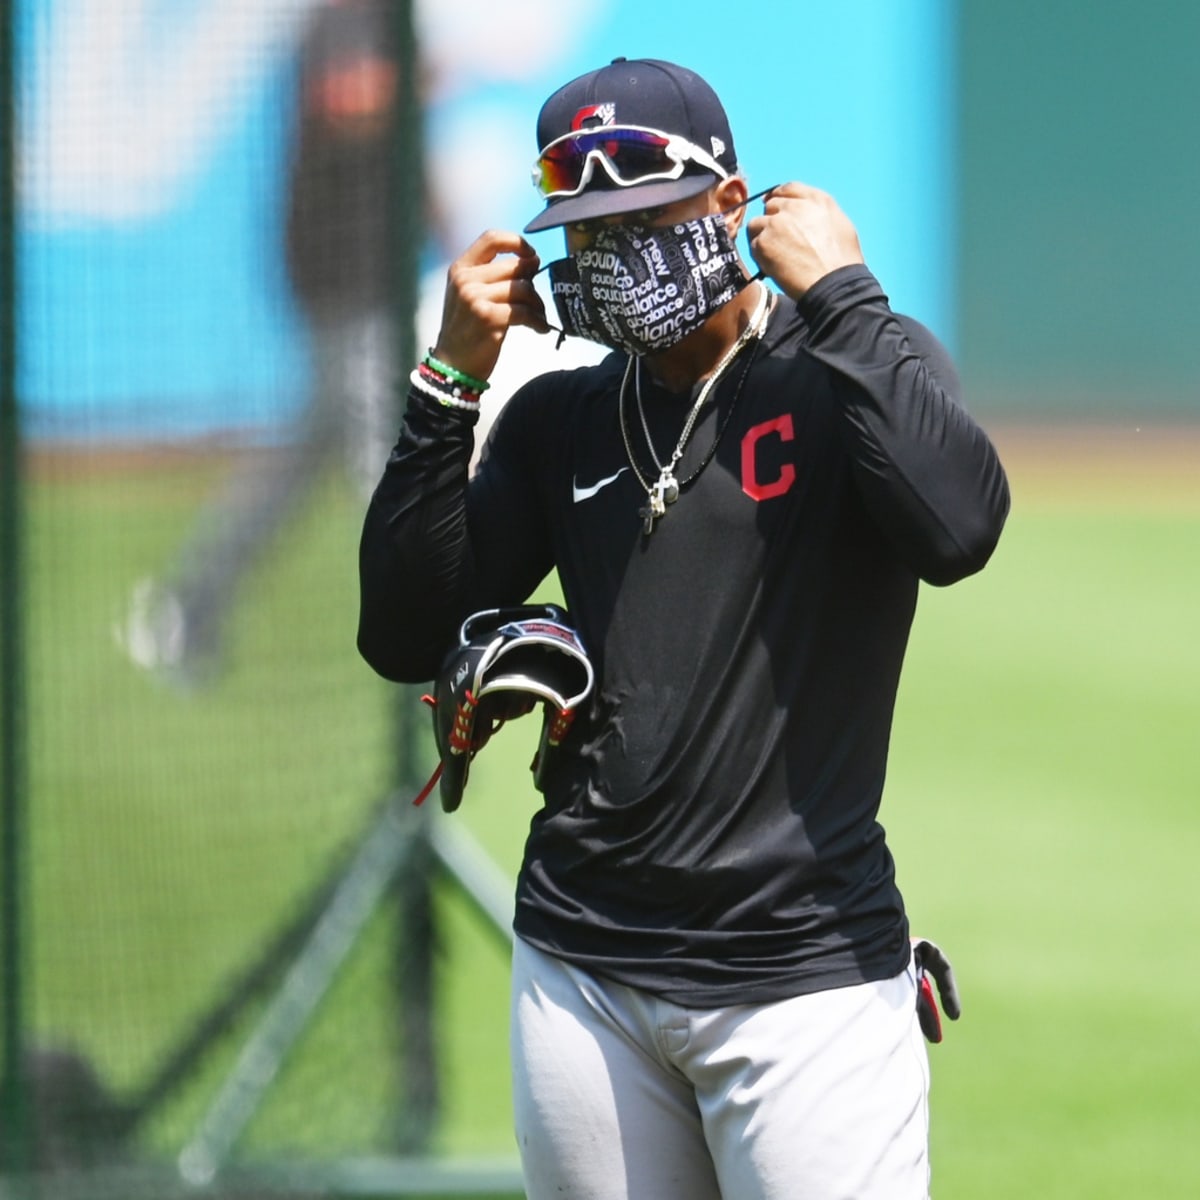 Report: Indians To 'Aggressively' Listen To Offers For Francisco Lindor